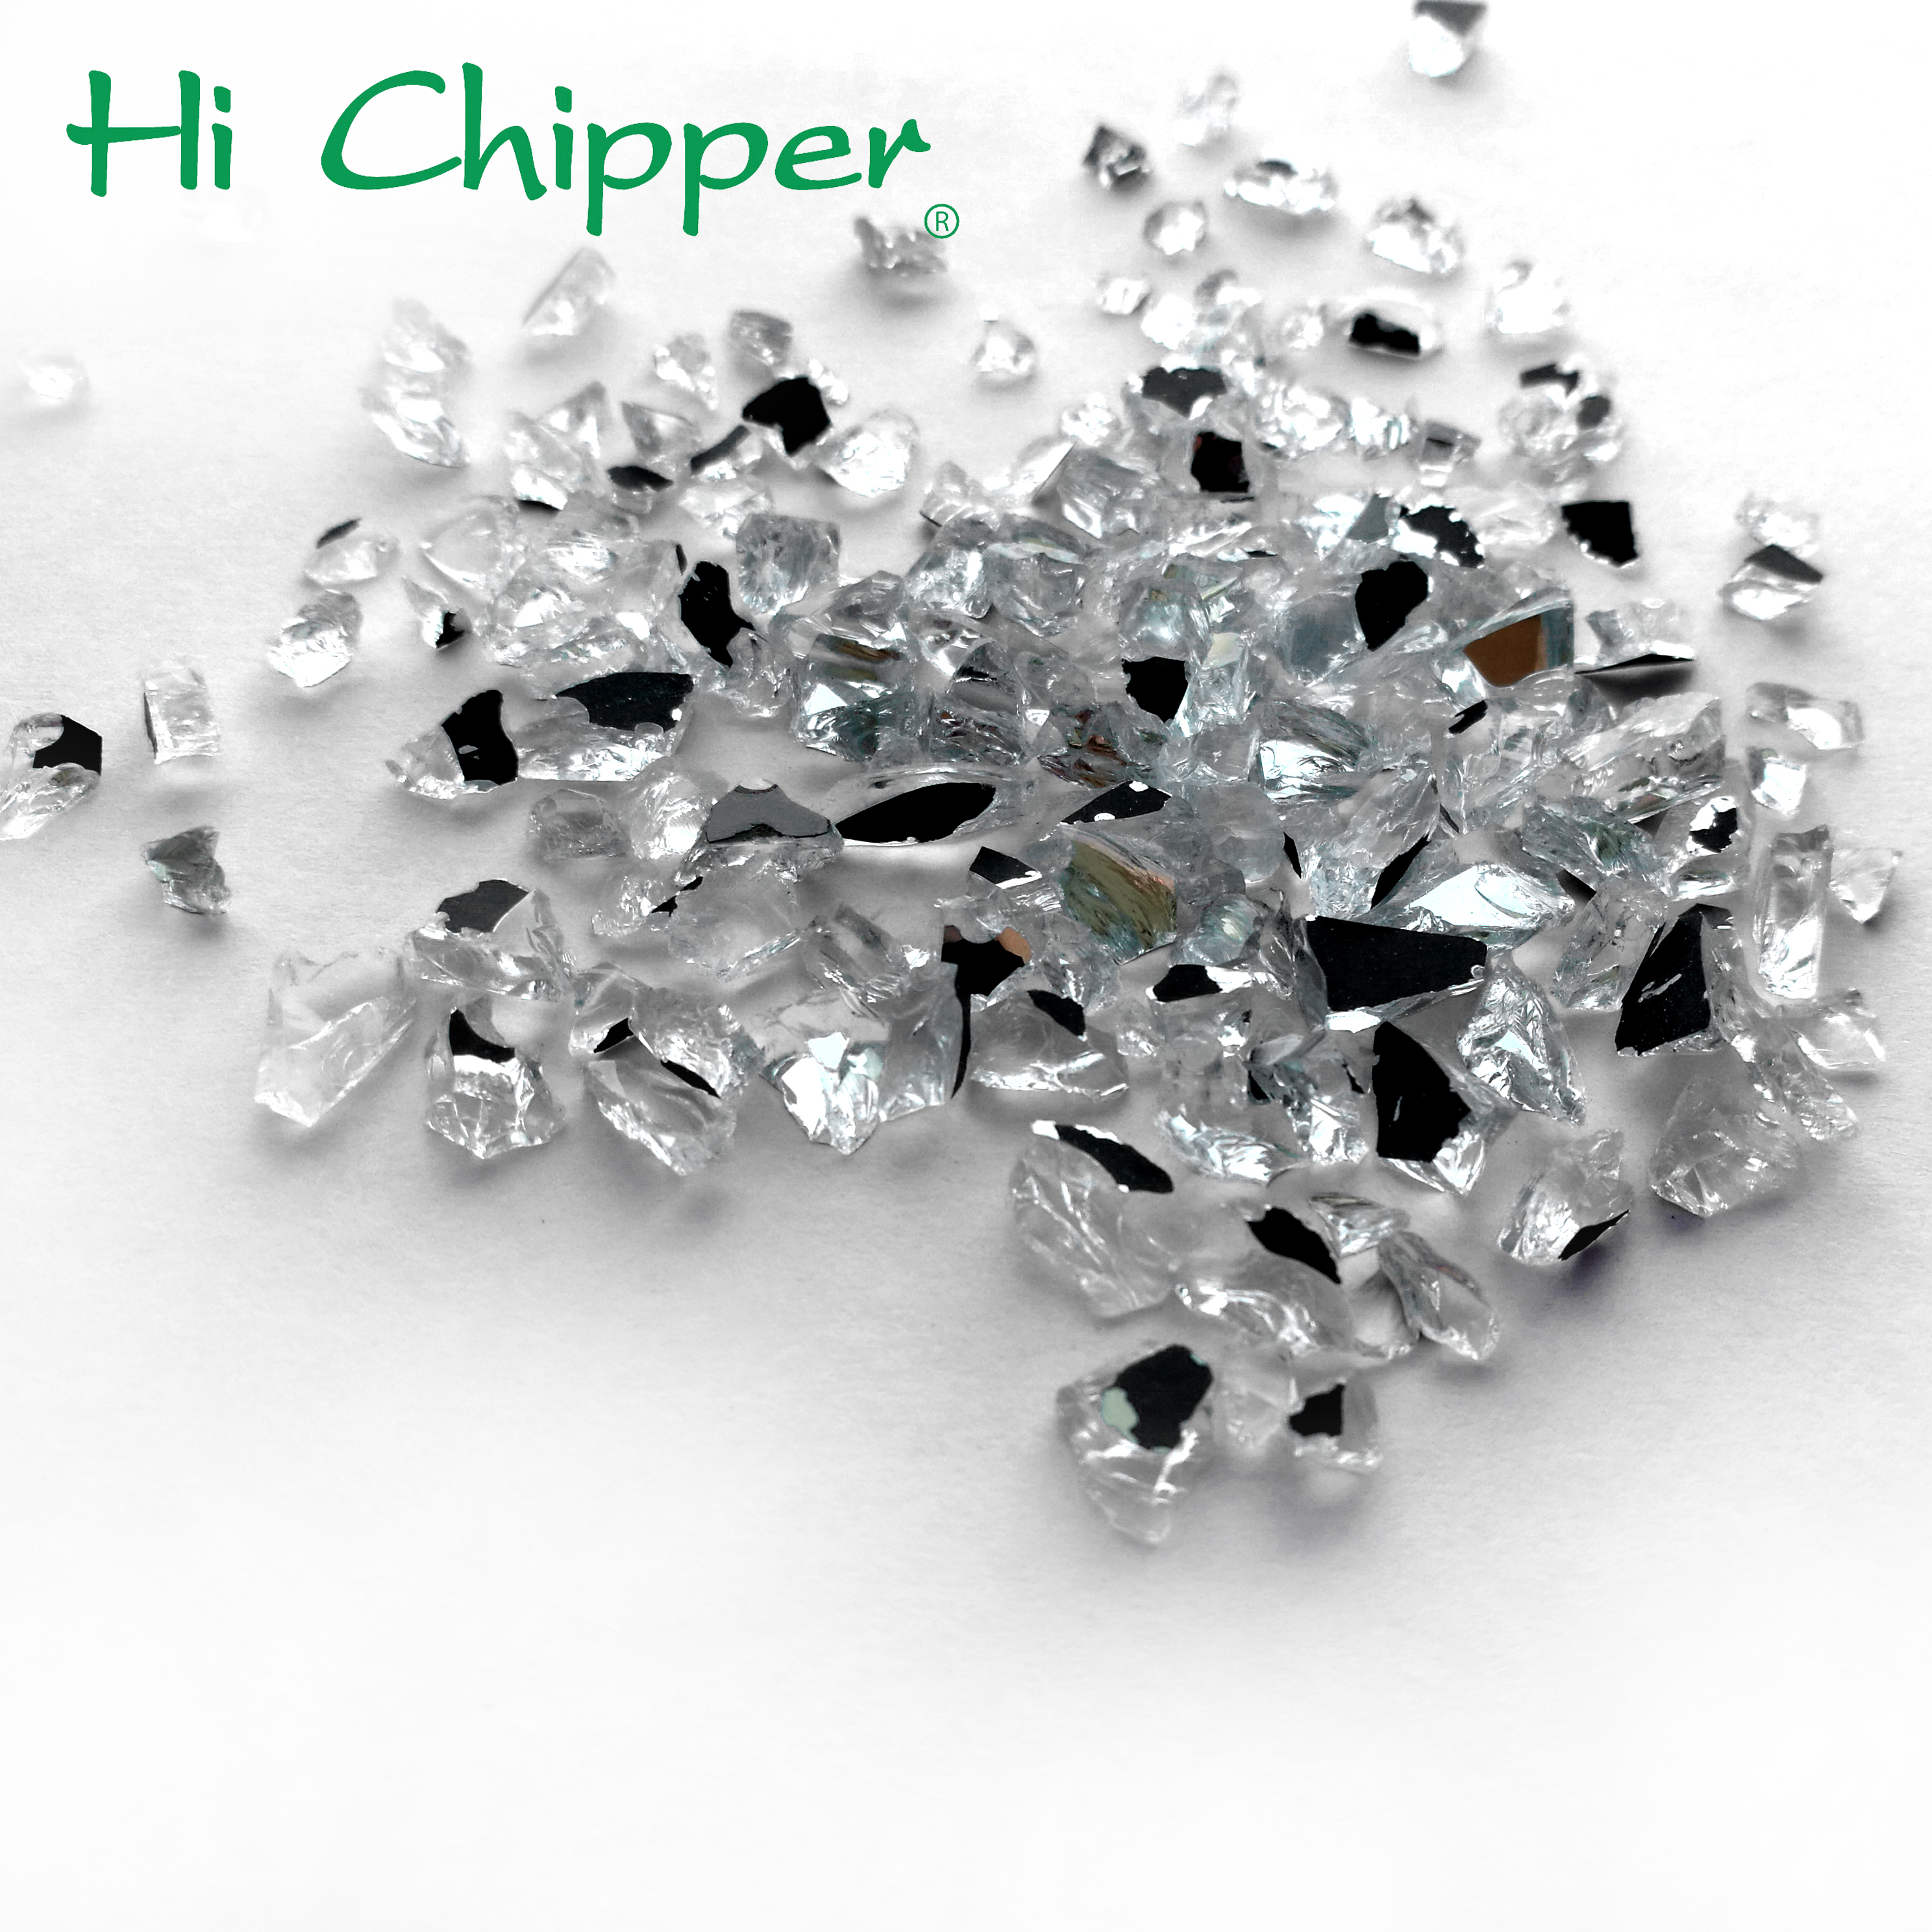 Crushed Mirror Glass for Producing Kitchen Countertops - China